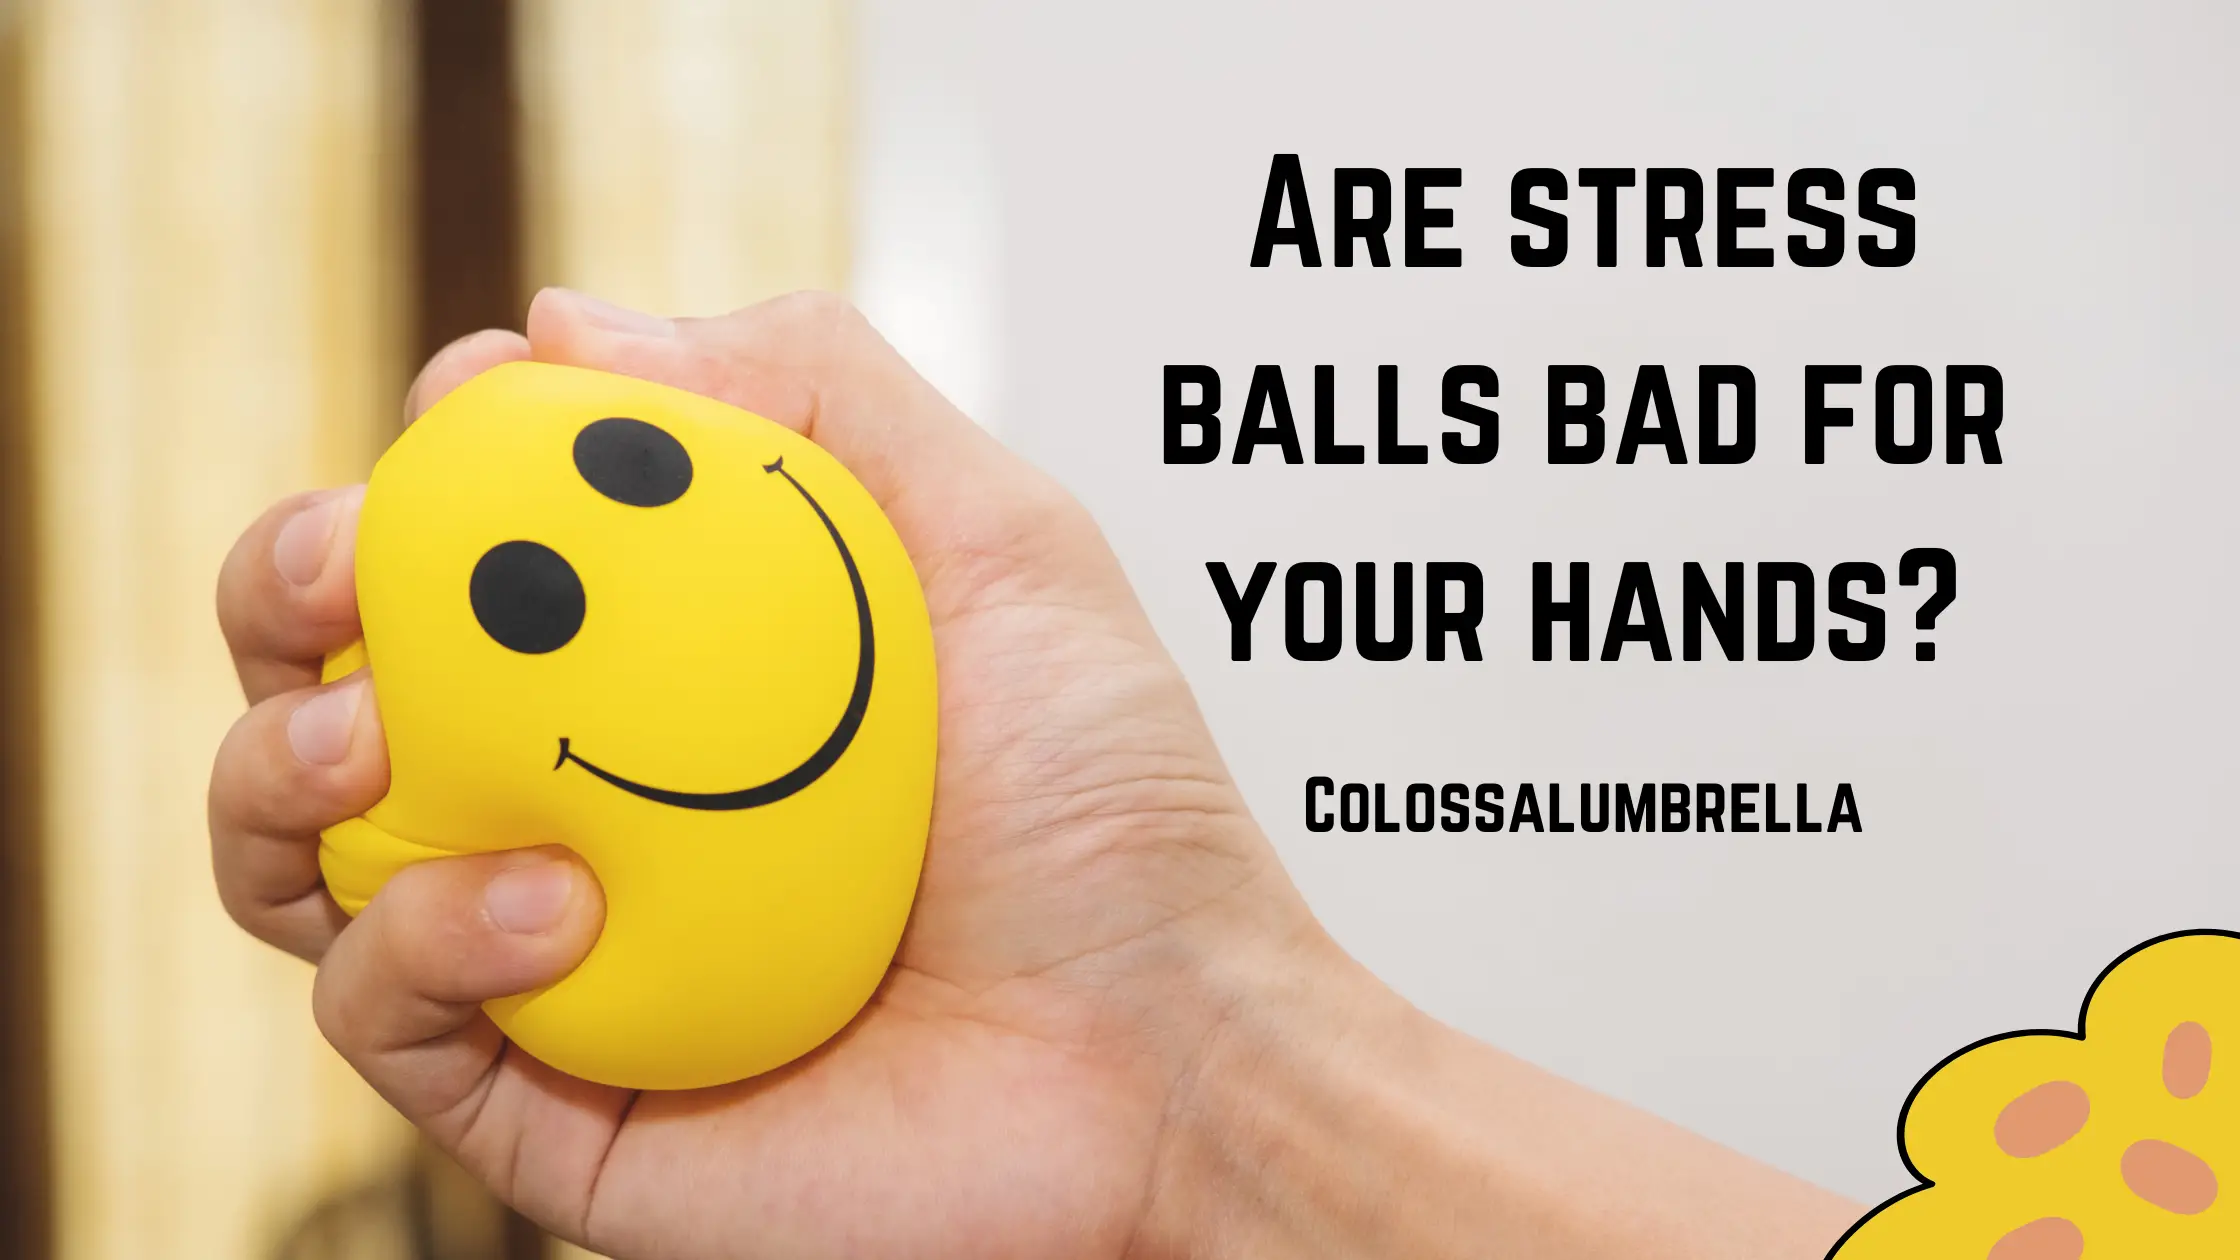 Are stress balls bad for your hands – What experts say!